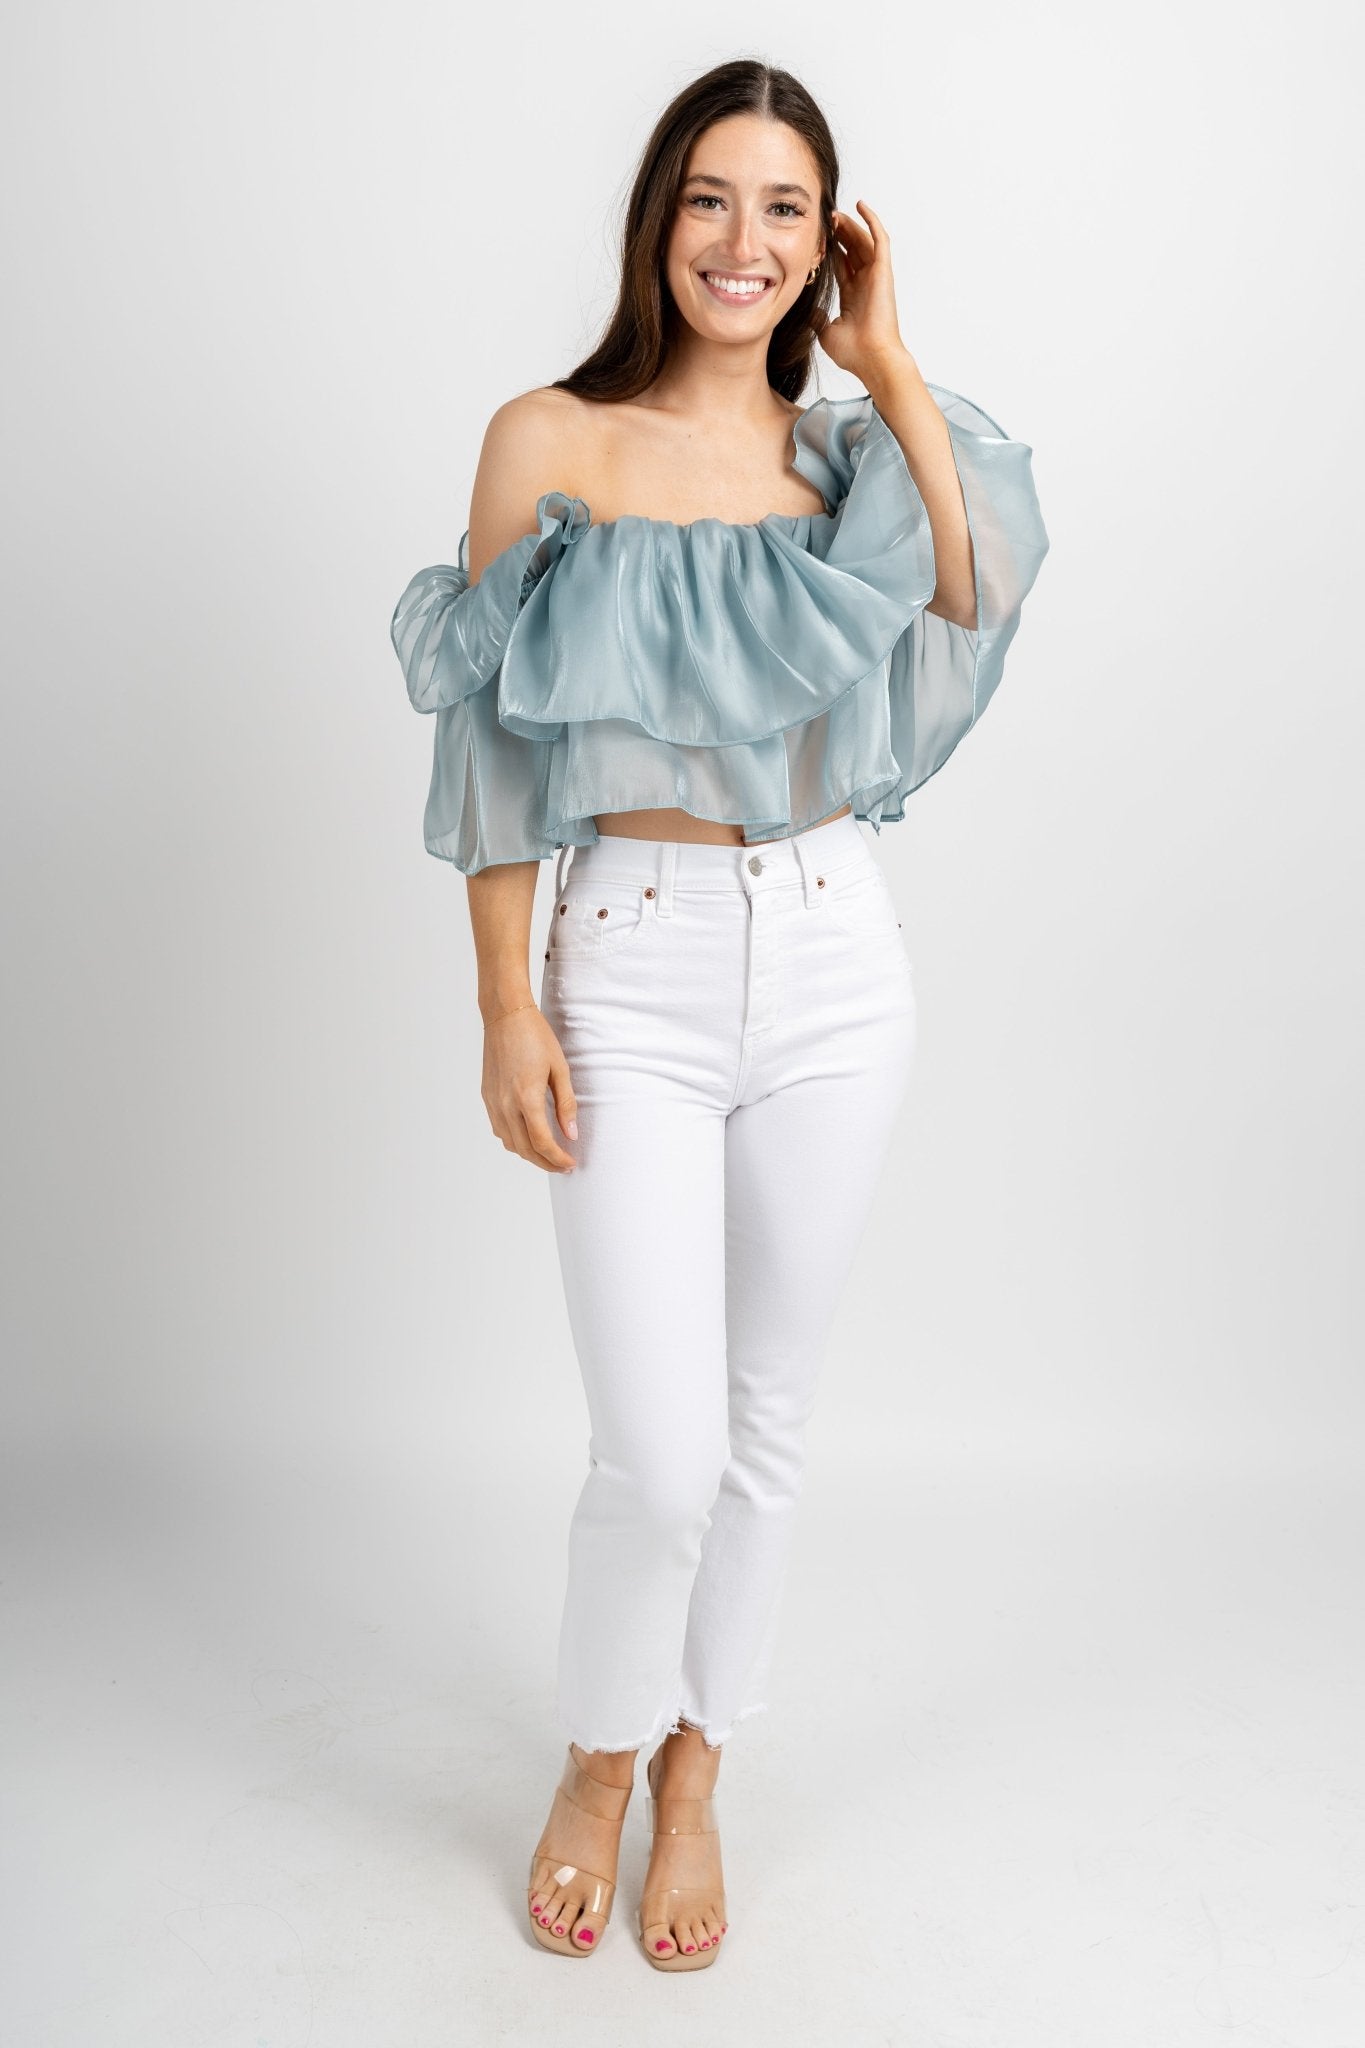 Ruffle off shoulder top dusty blue - Cute Top - Trendy Easter Clothing Line at Lush Fashion Lounge Boutique in Oklahoma